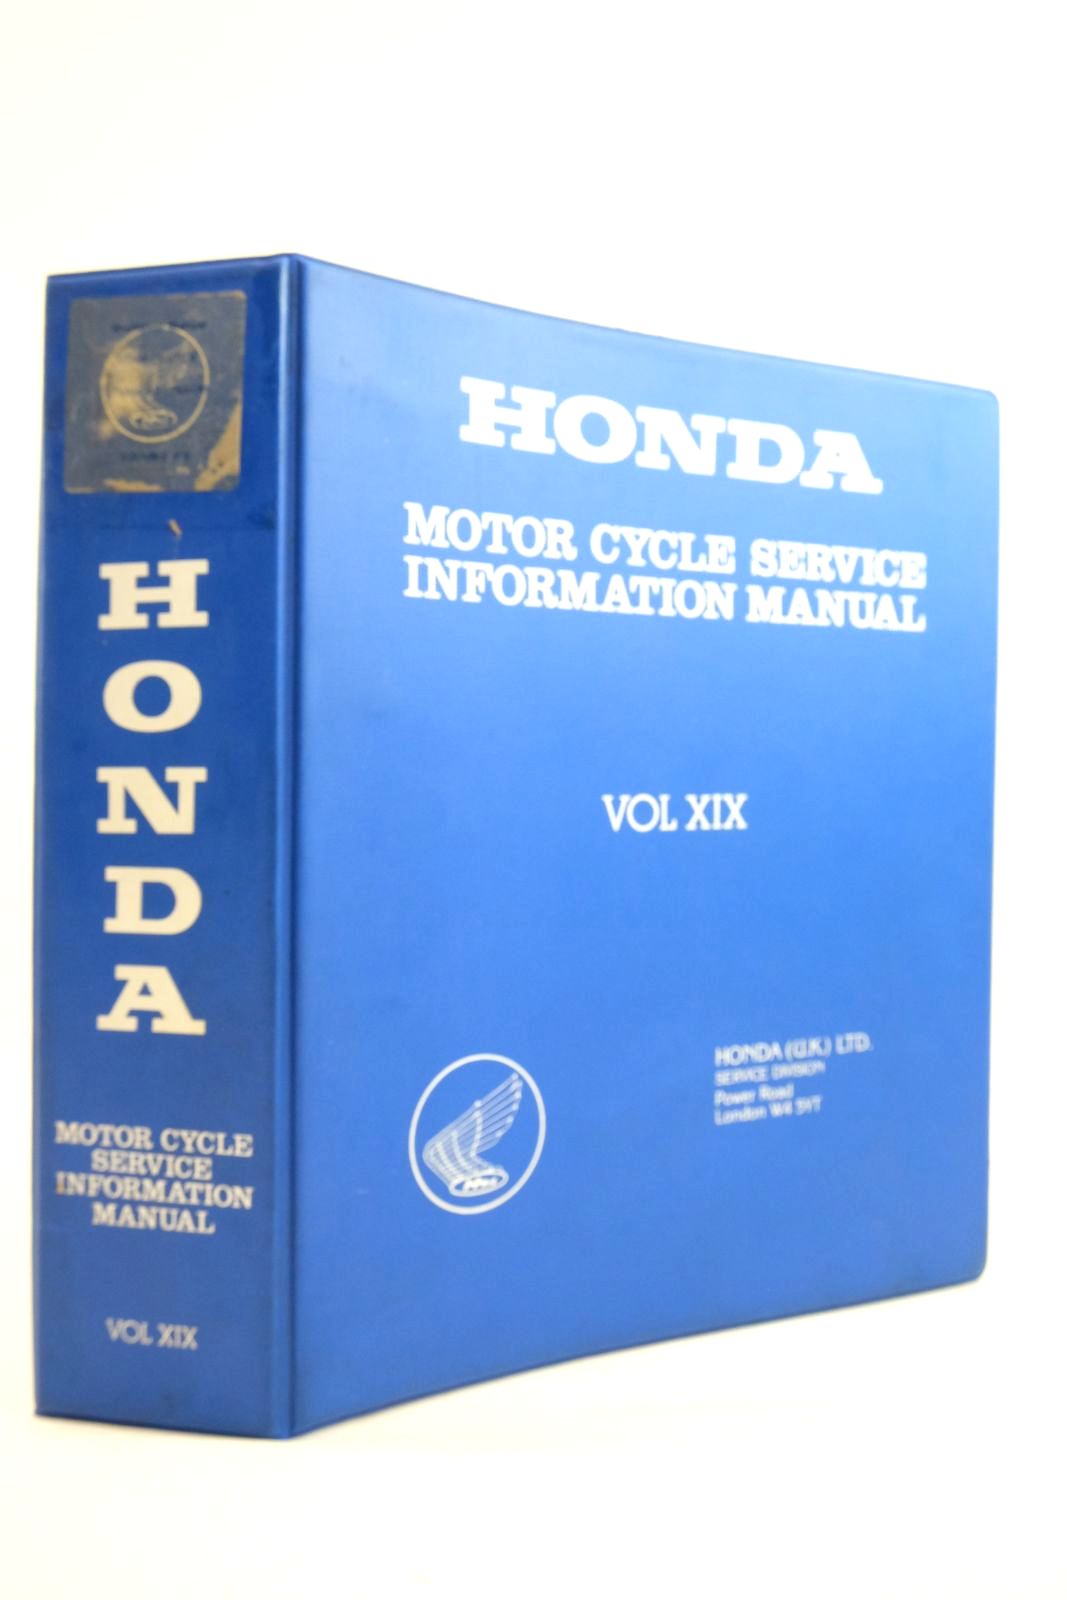 Photo of HONDA MOTOR CYCLE SERVICE INFORMATION MANUAL VOLUME XIX published by Honda (u.K.) Ltd. (STOCK CODE: 2134577)  for sale by Stella & Rose's Books